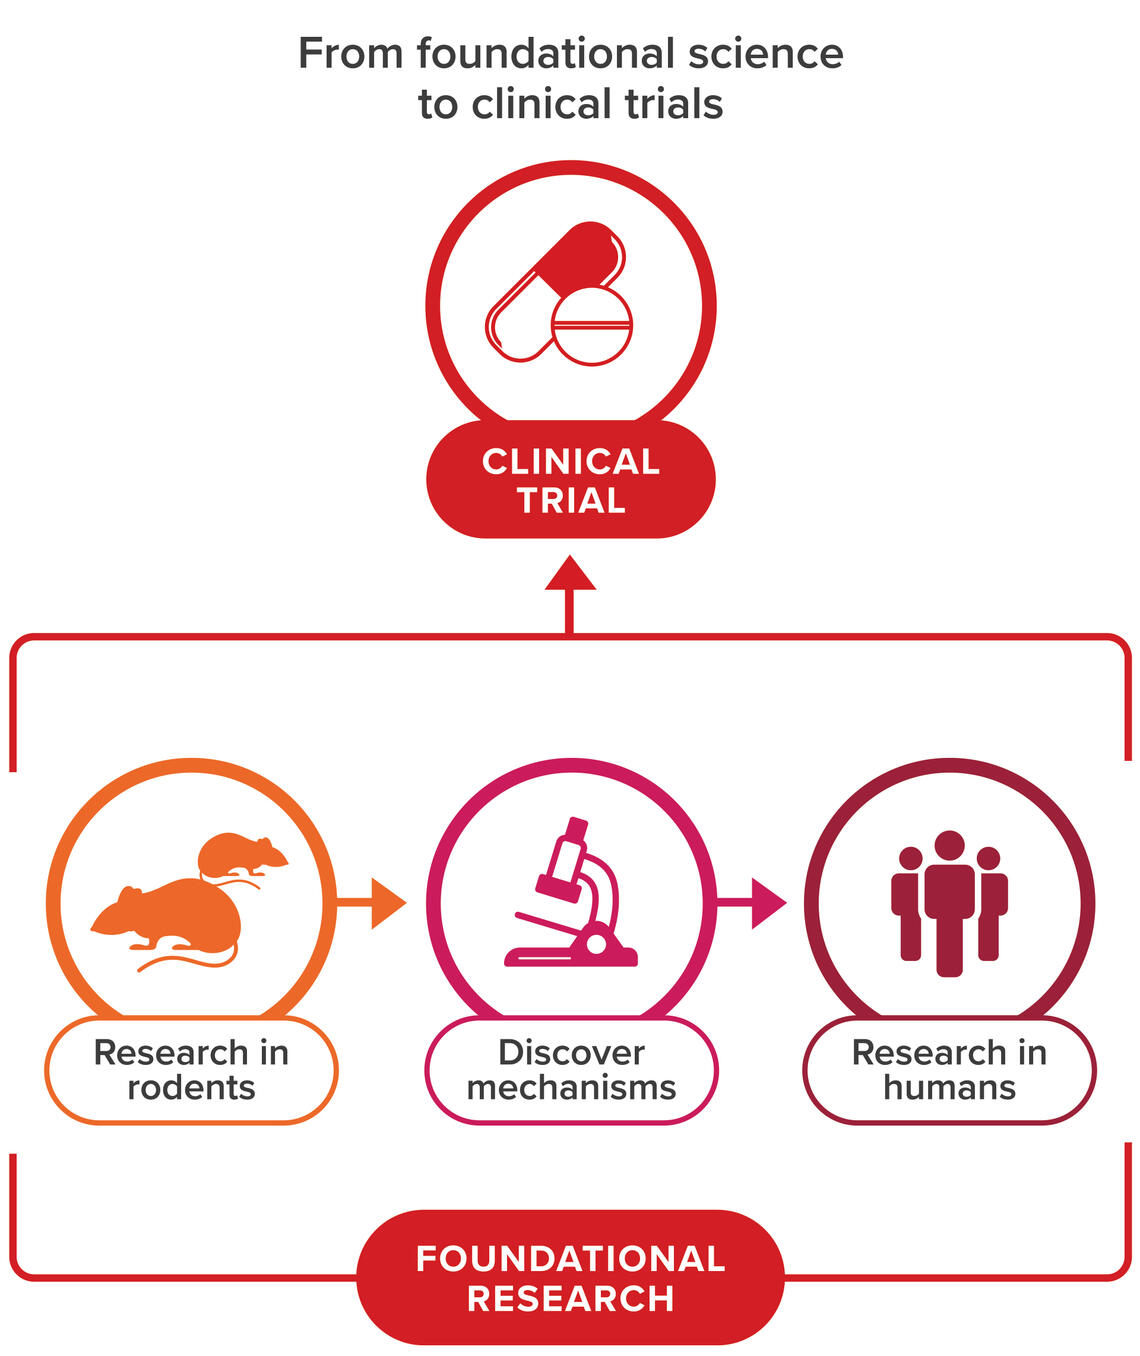 A diagram explains the three steps in foundational research that are conducted before and inform clinical trials: research in rodents, discovering mechanisms, and research in humans.